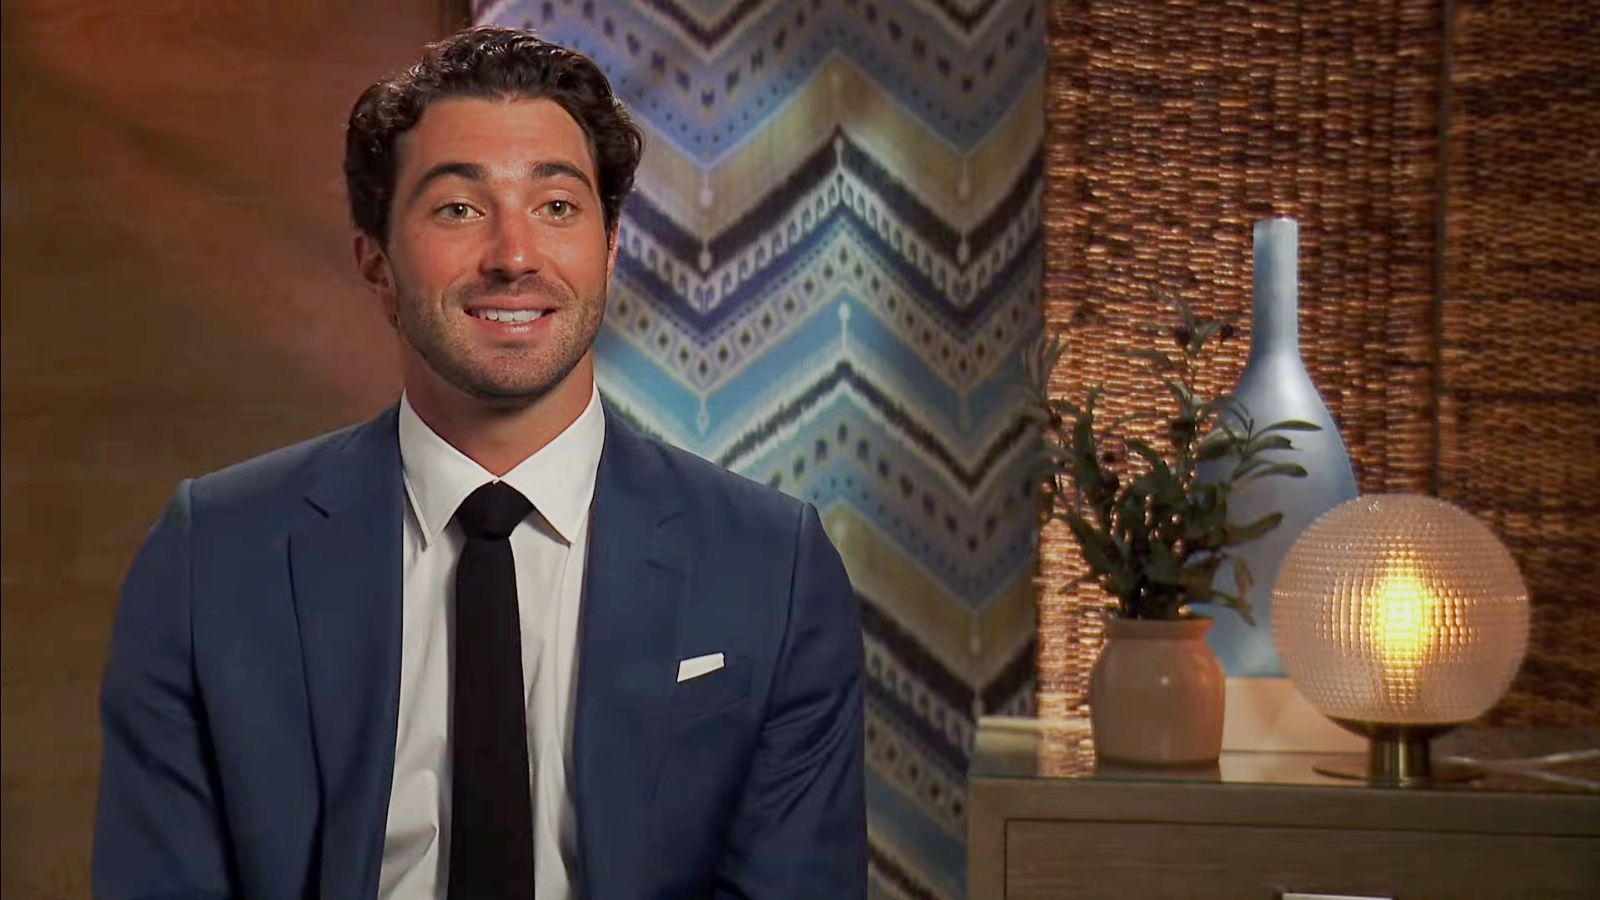 28-year-old tennis instructor Joey Graziadei of The Bachelor - filming locations